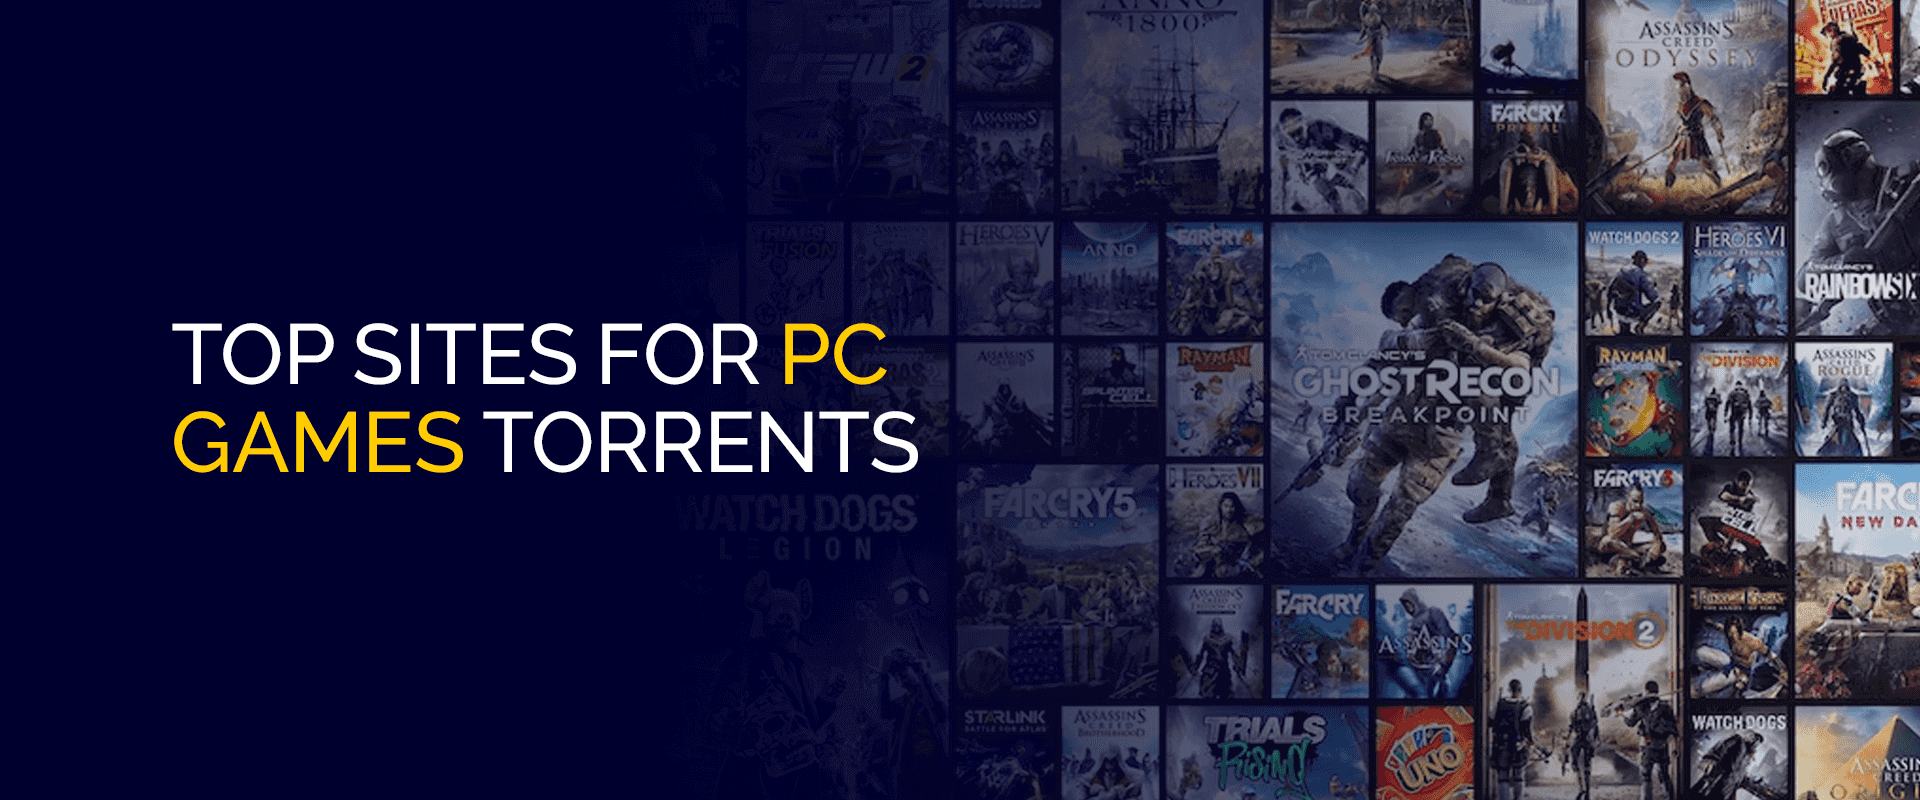 Top Sites For PC Games Torrents F 